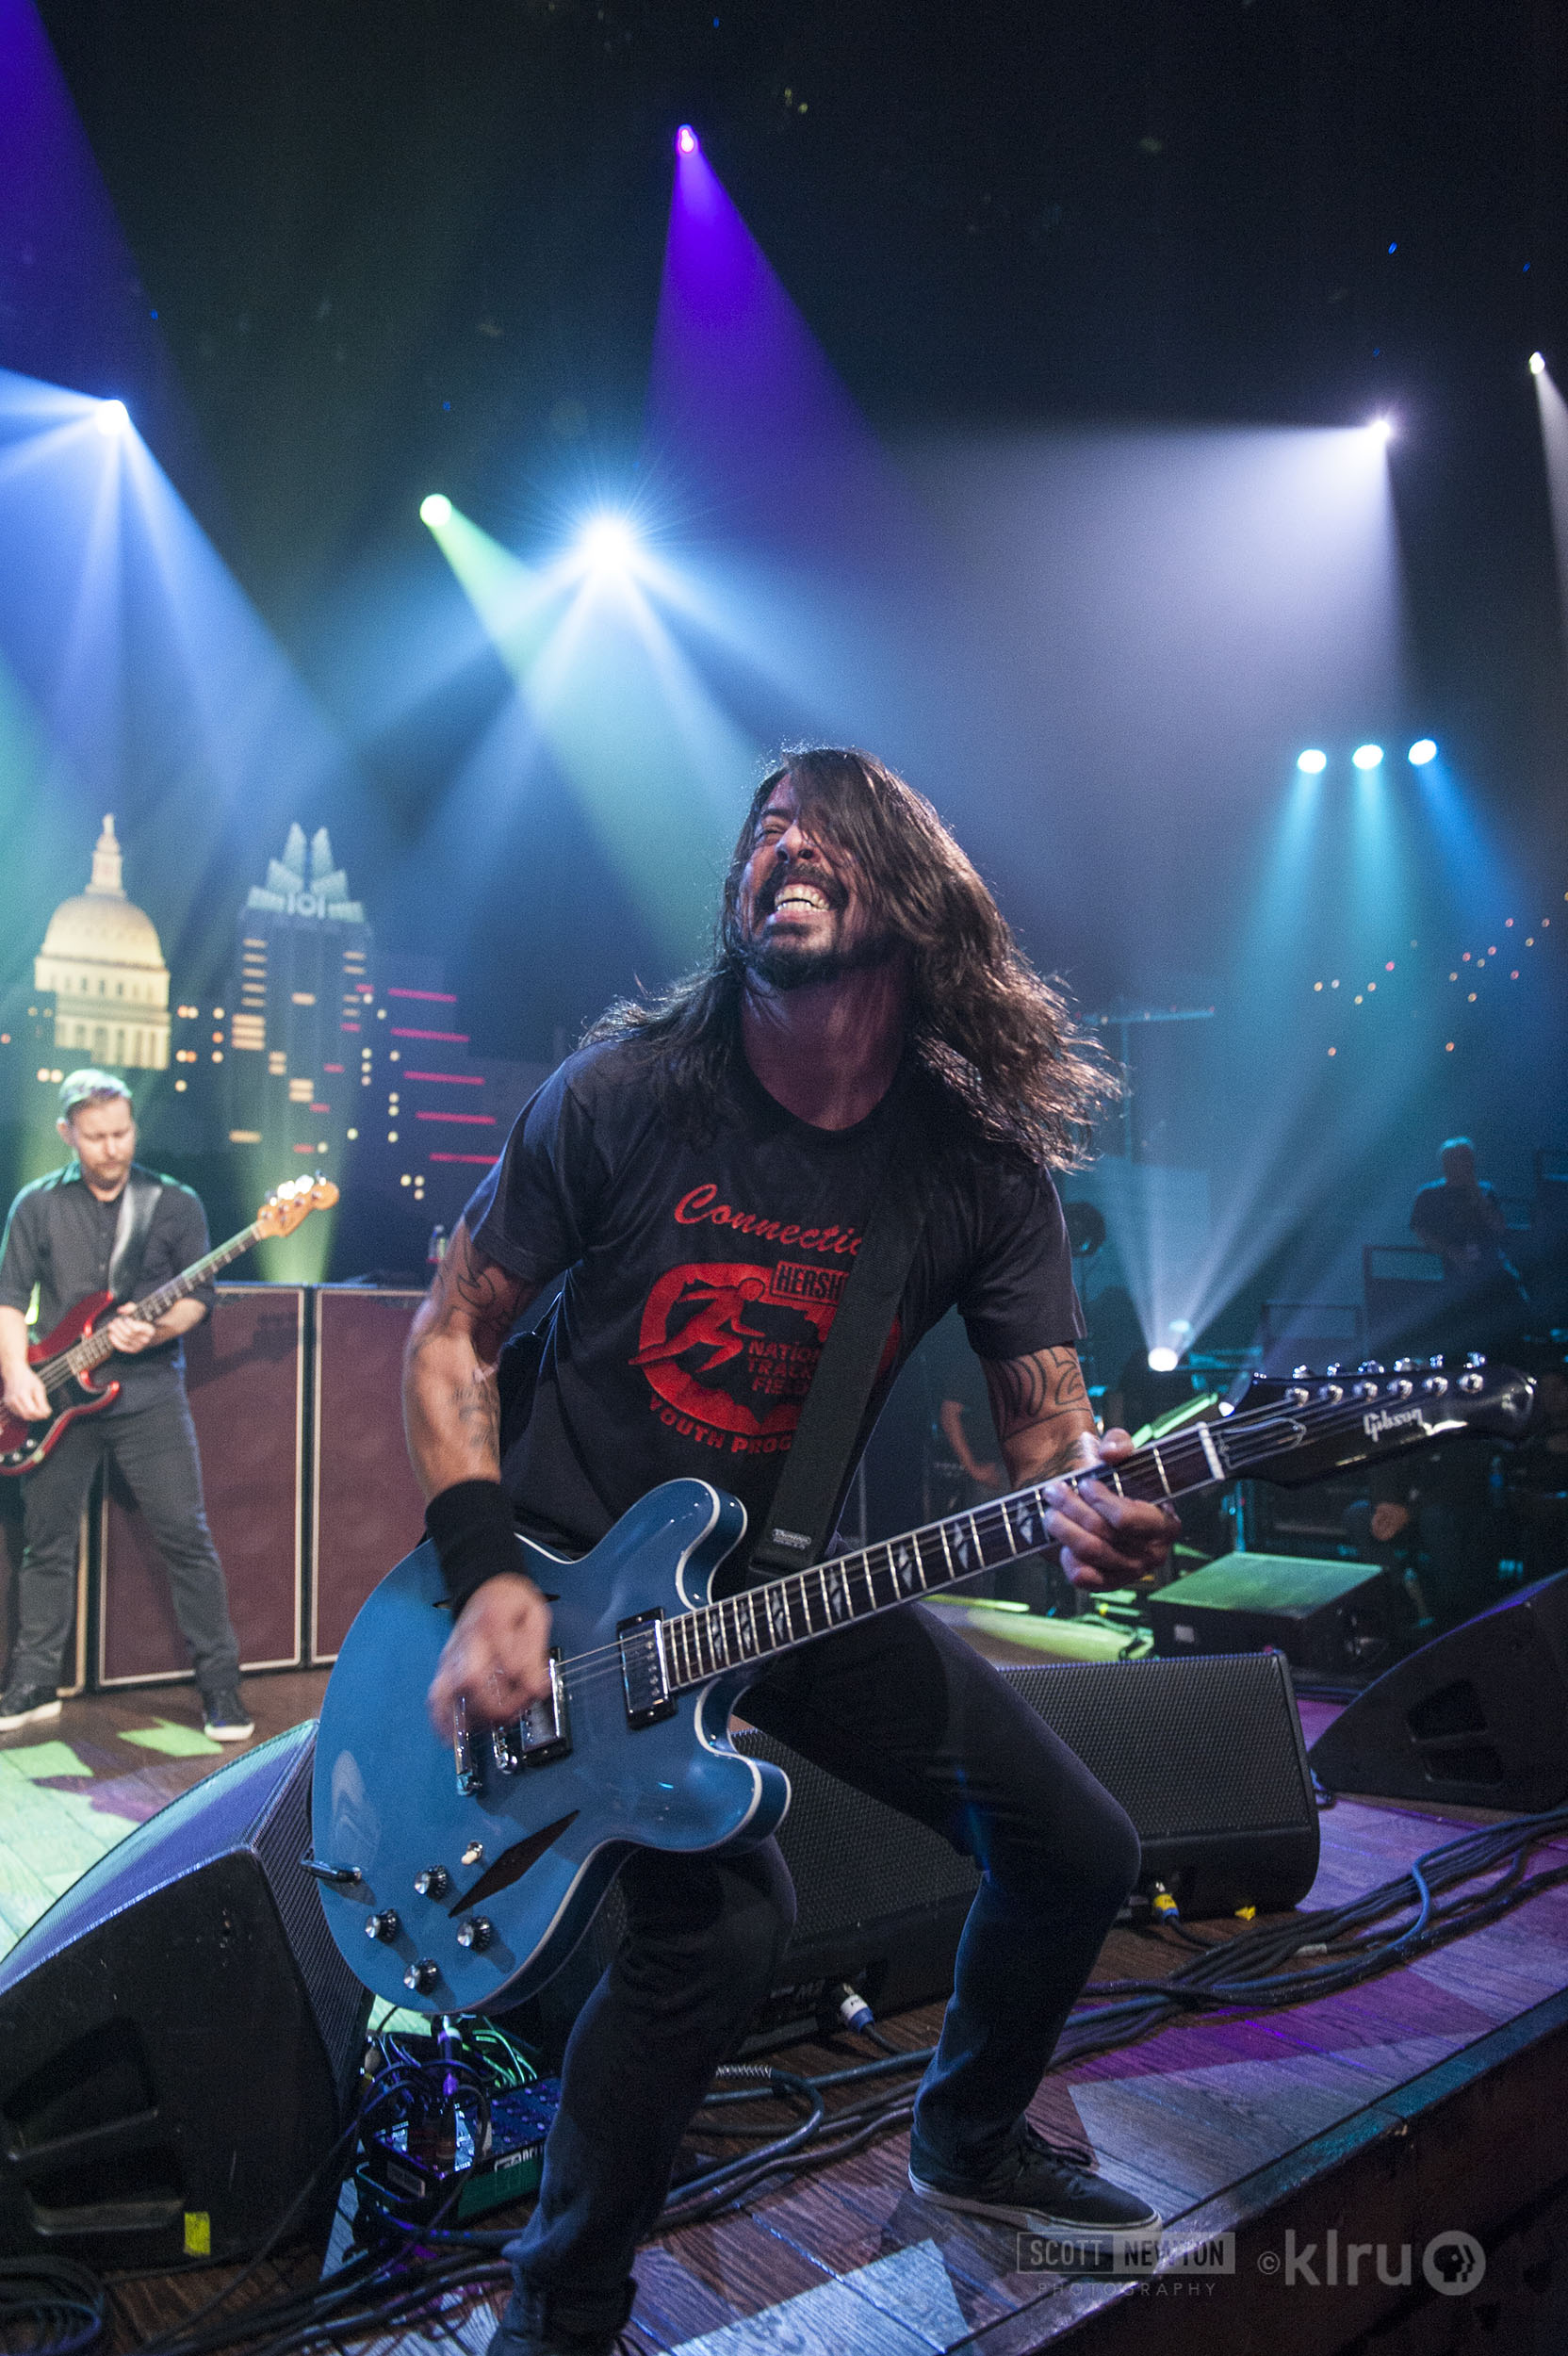 Dave Grohl  -- The Foo Fighters -- 2015